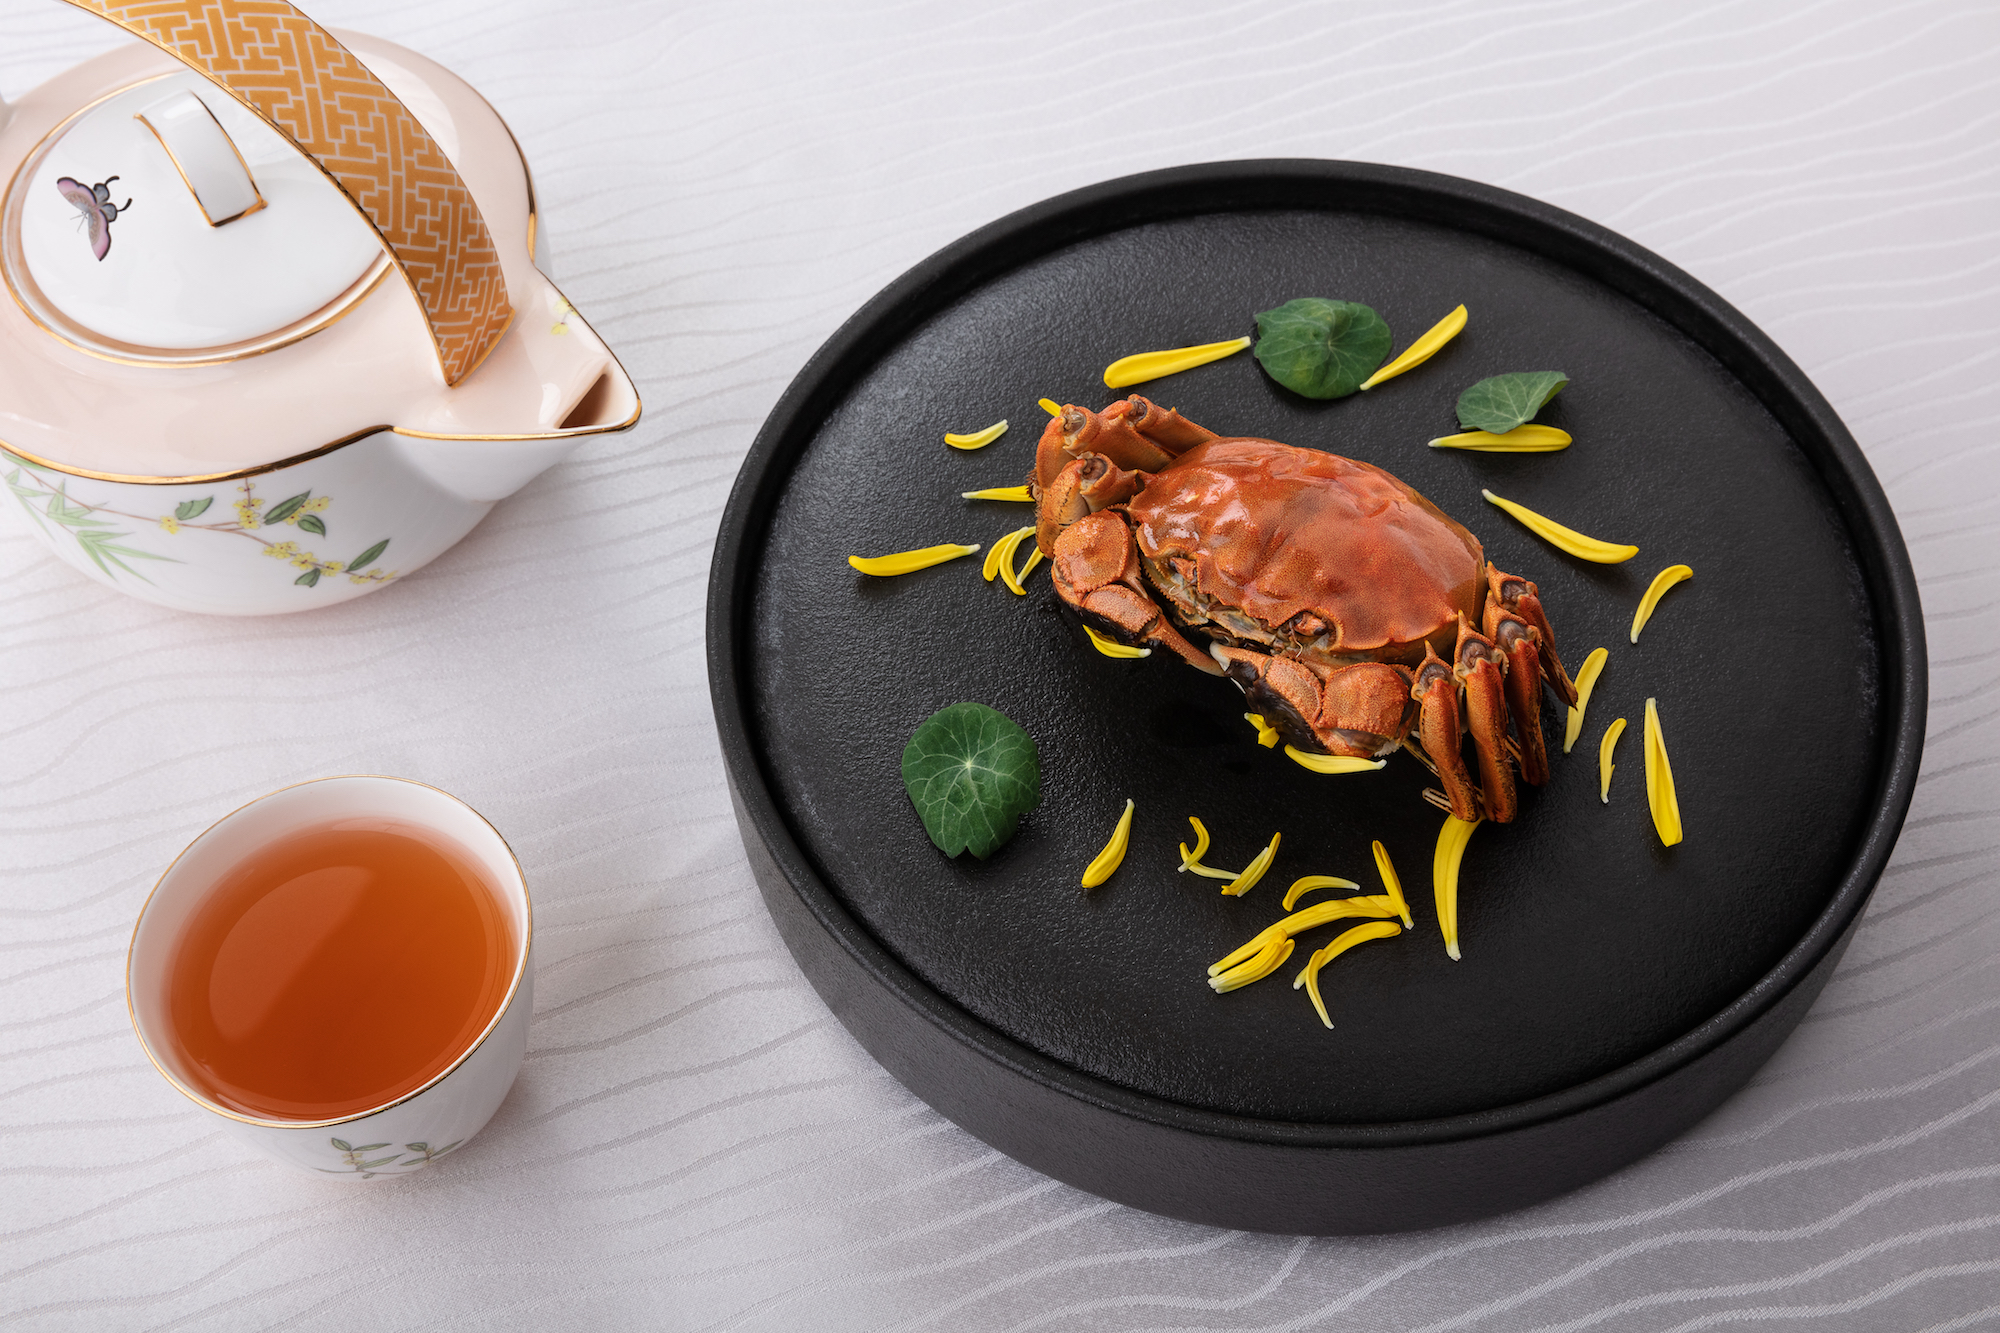 Hairy Crab Promotion at Sands Resorts with Tea Pot and Cup